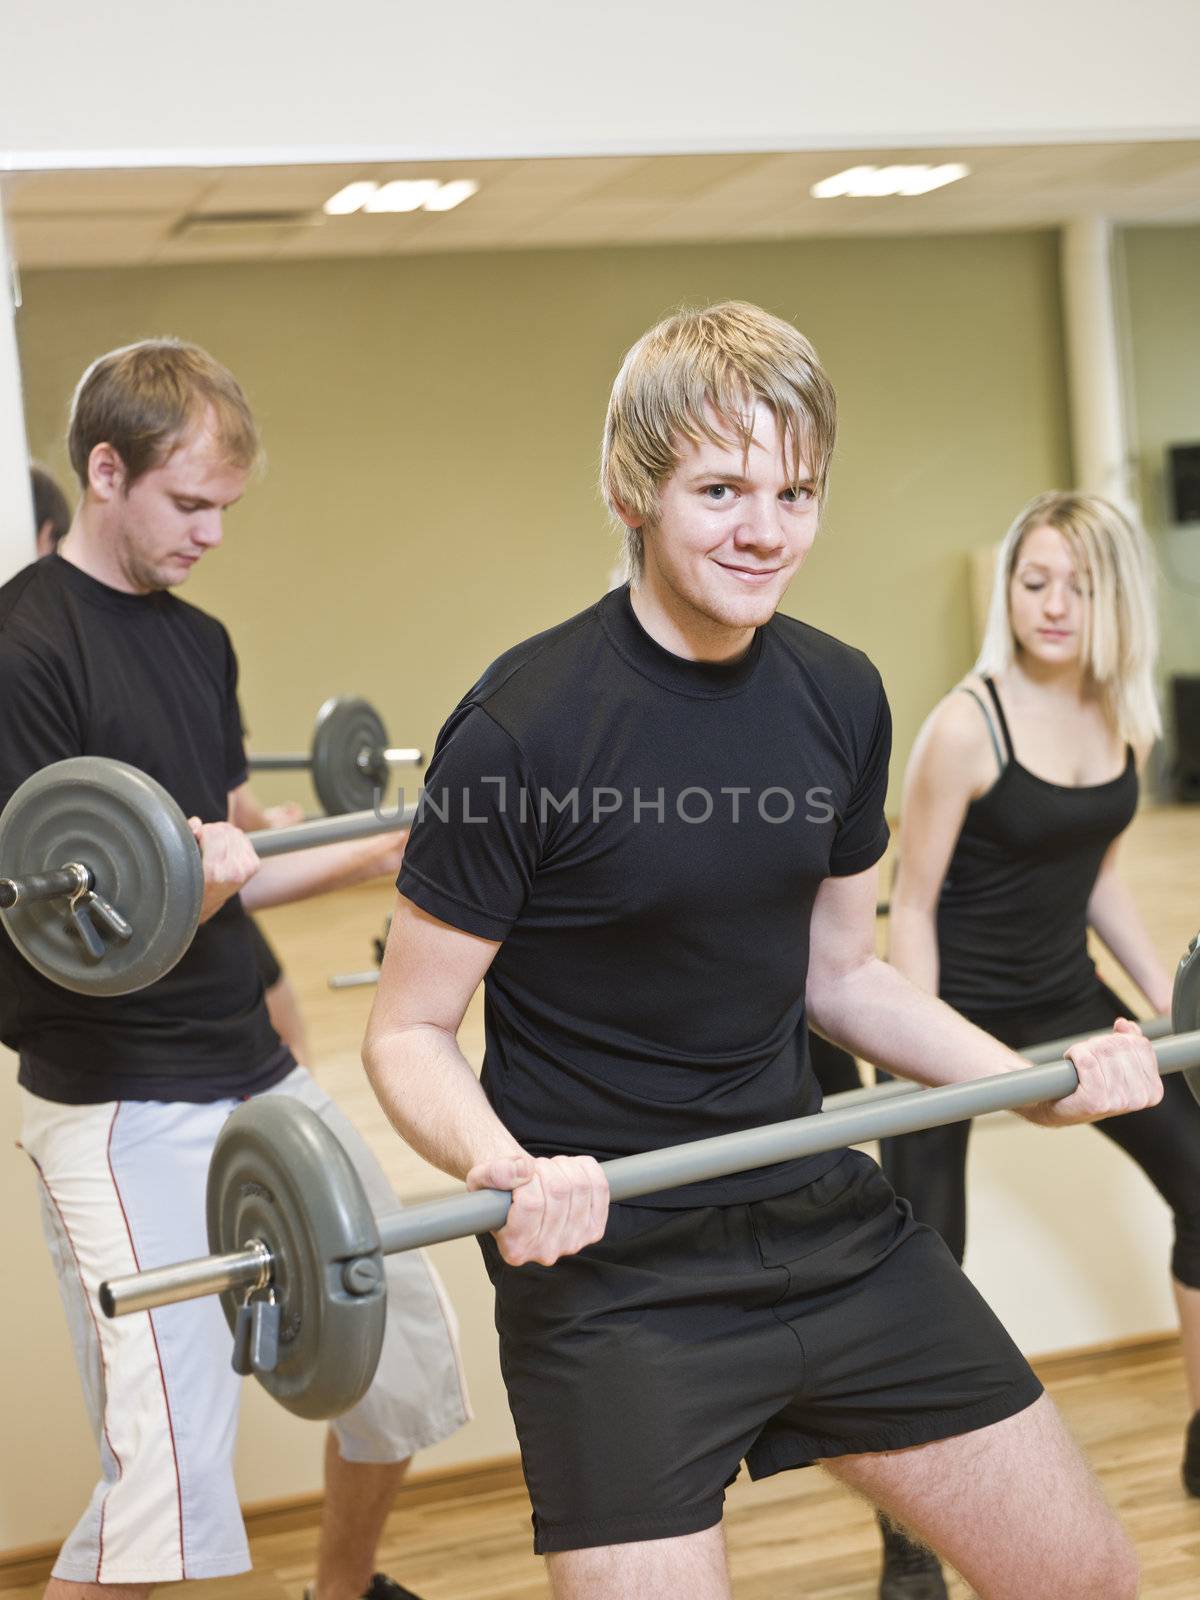 Group of people lifting weights with a young man in focus